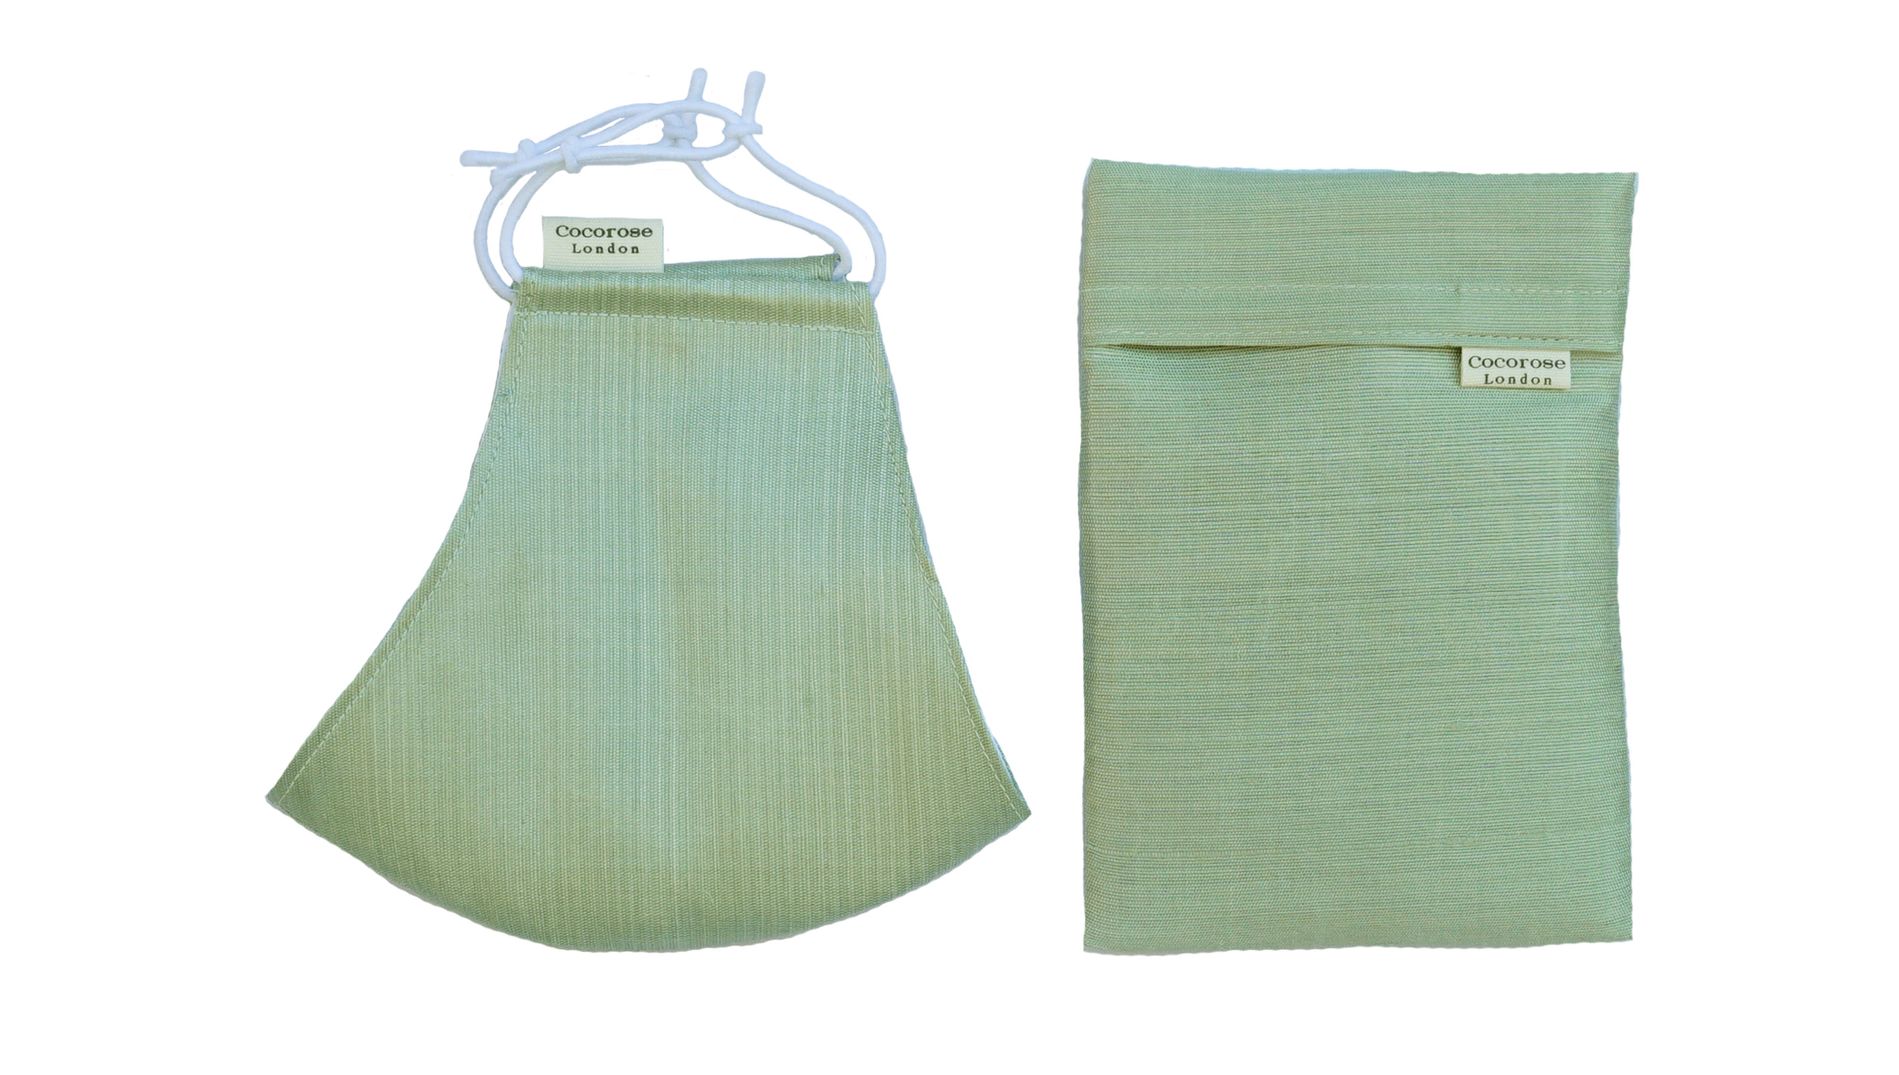 Sage green silk face mask with matching pouch, from Cocorose London